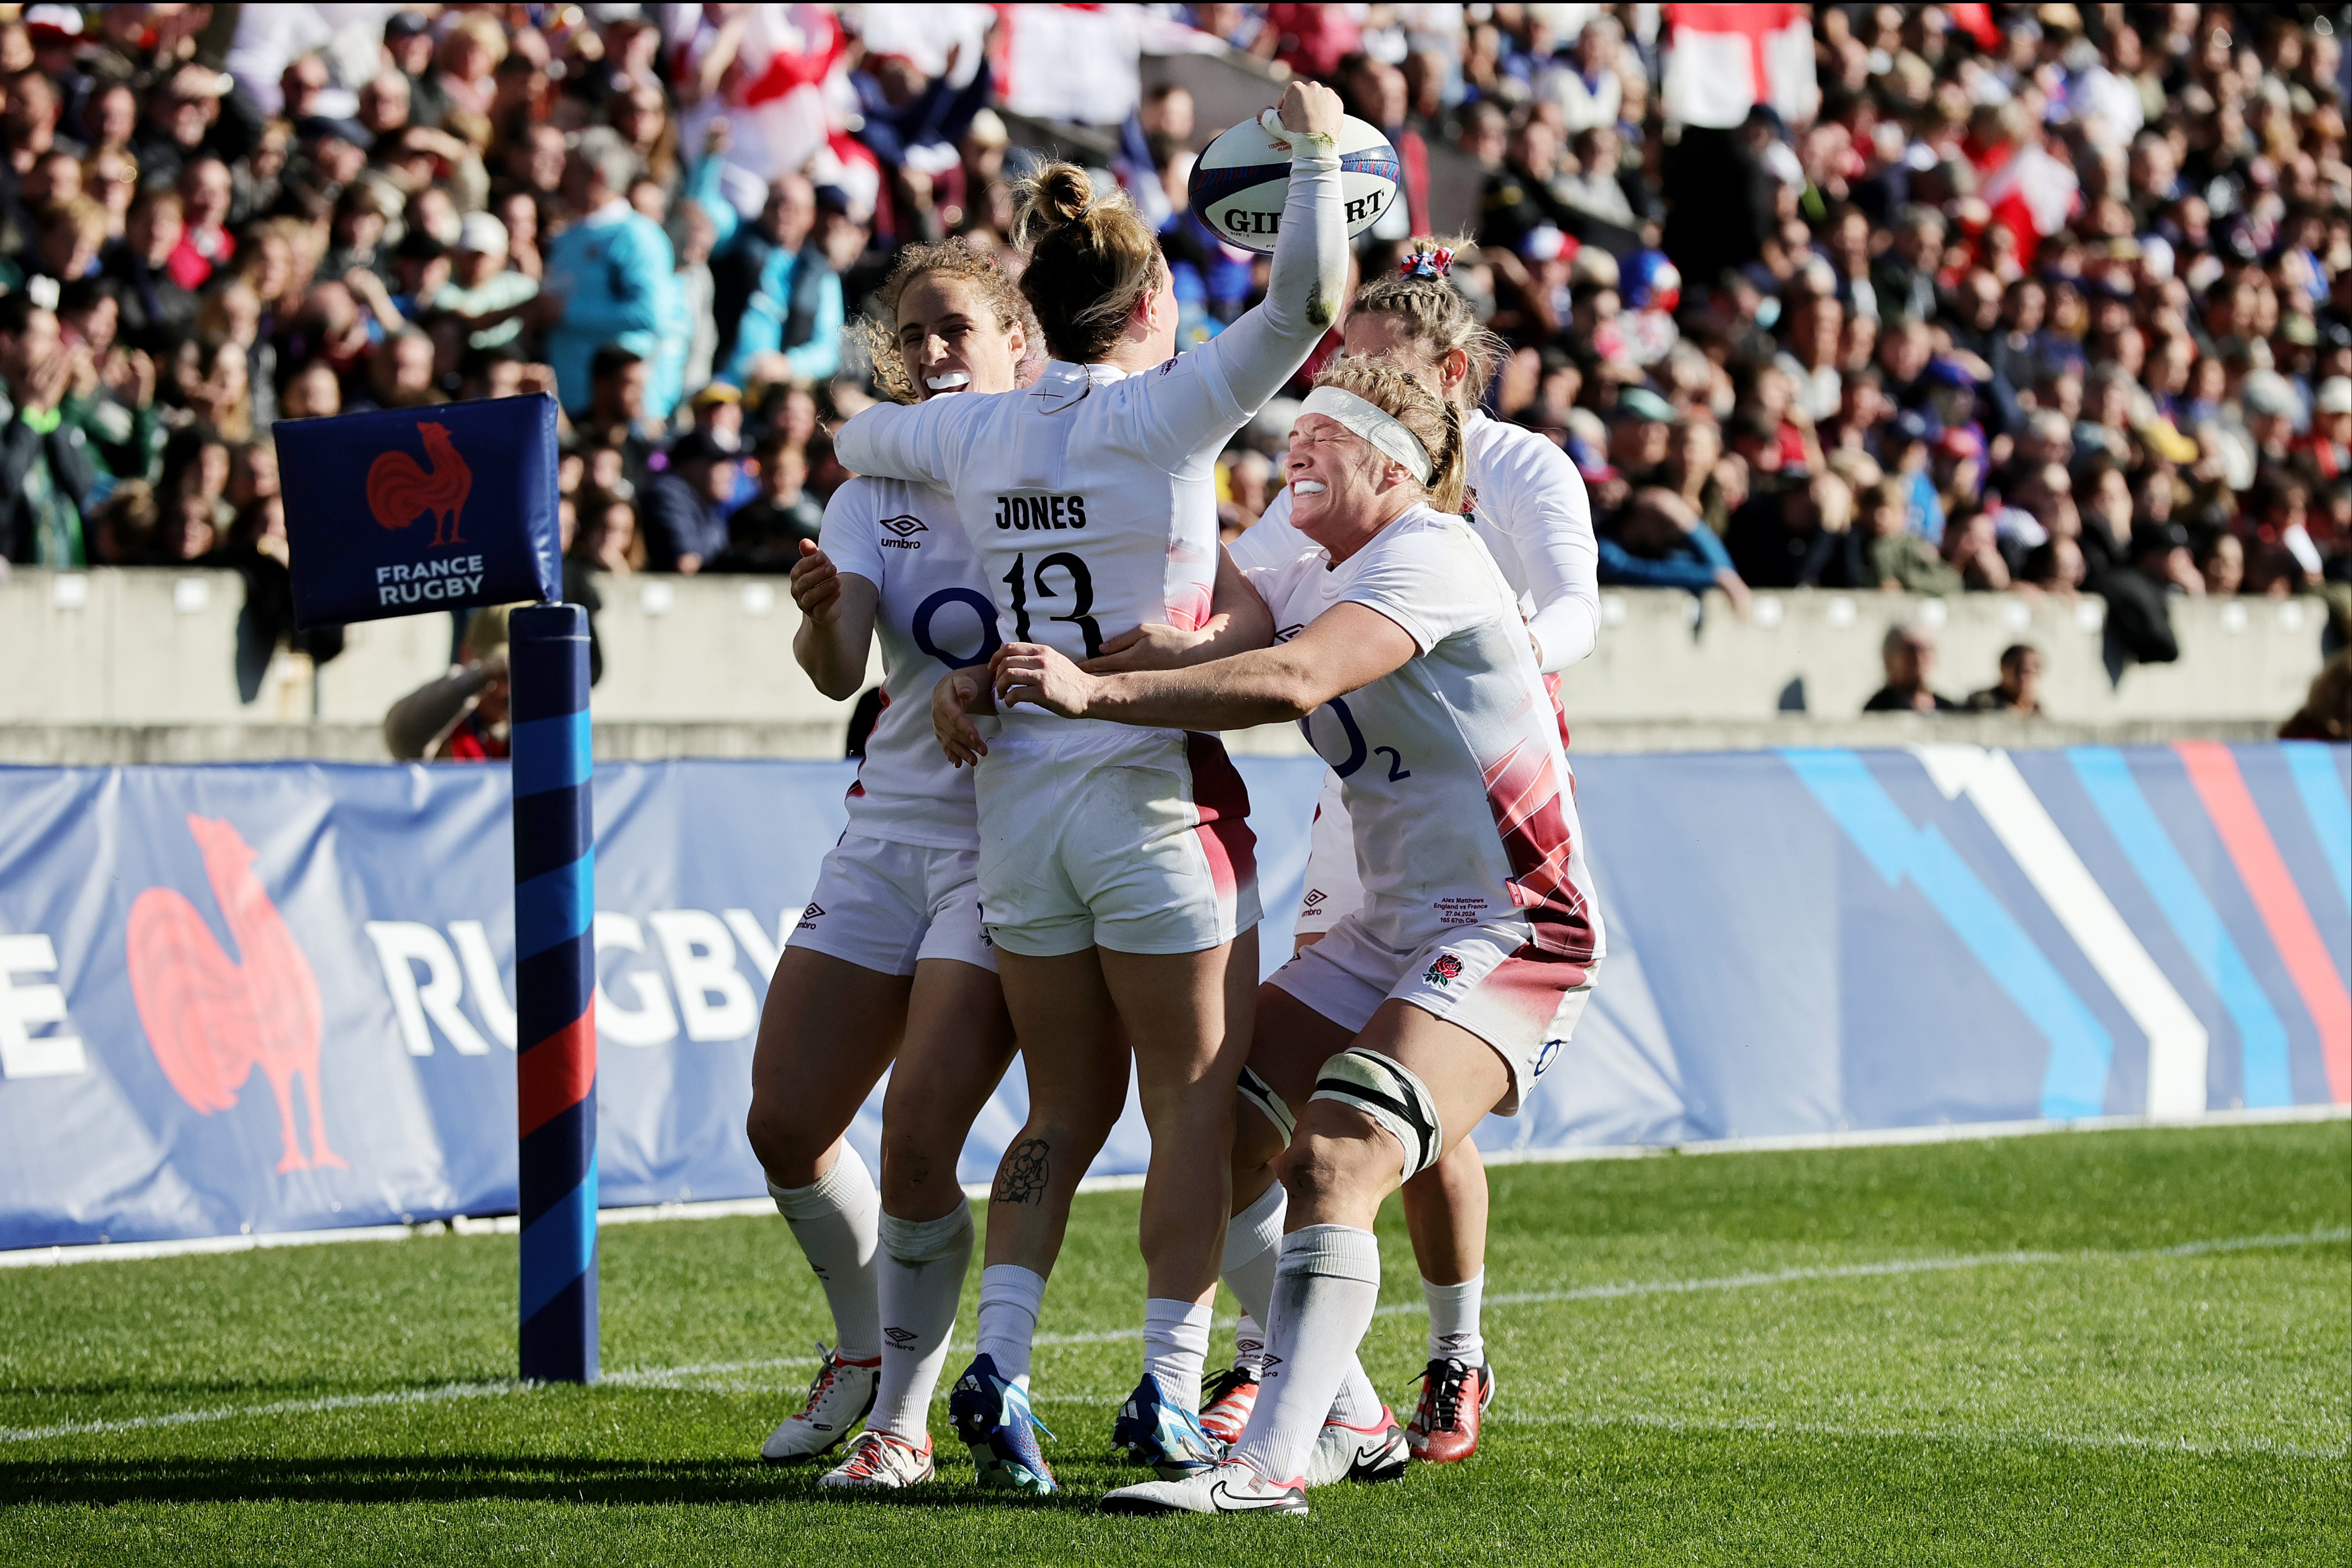 Marlie Packer believes this to be the best England side she has been a part of